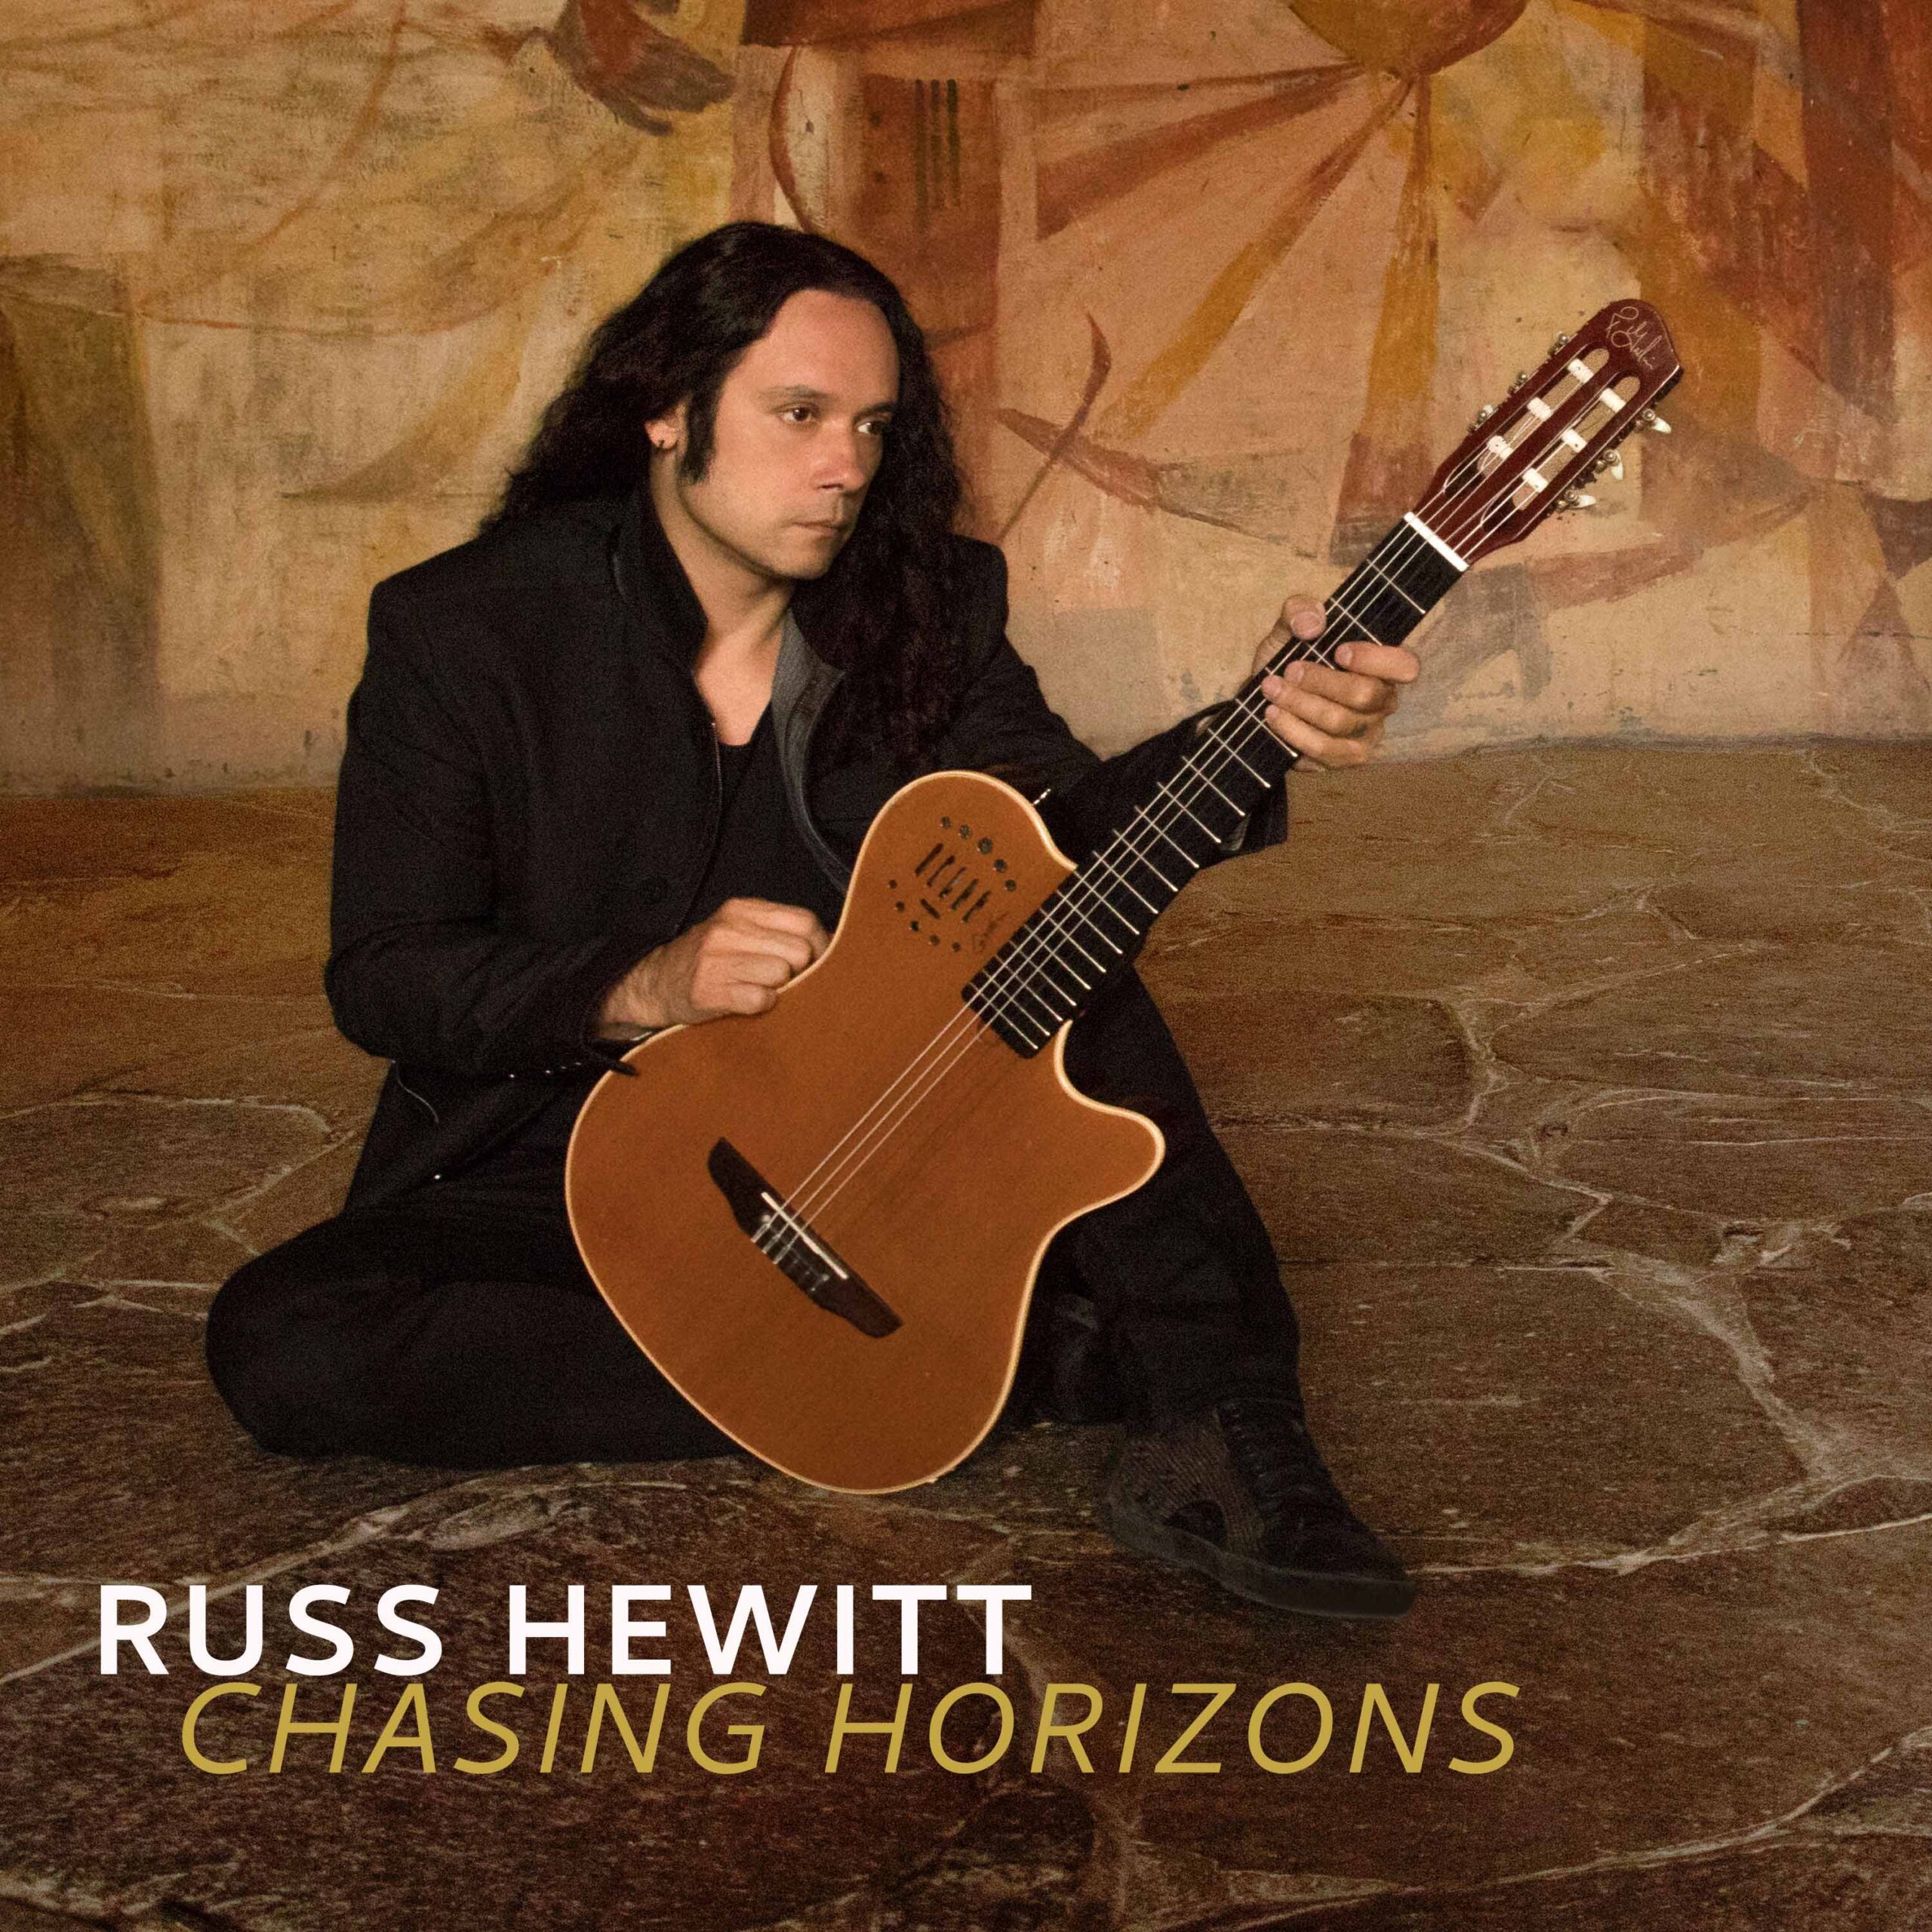 New album ‘CHASING HORIZONS’ is out!